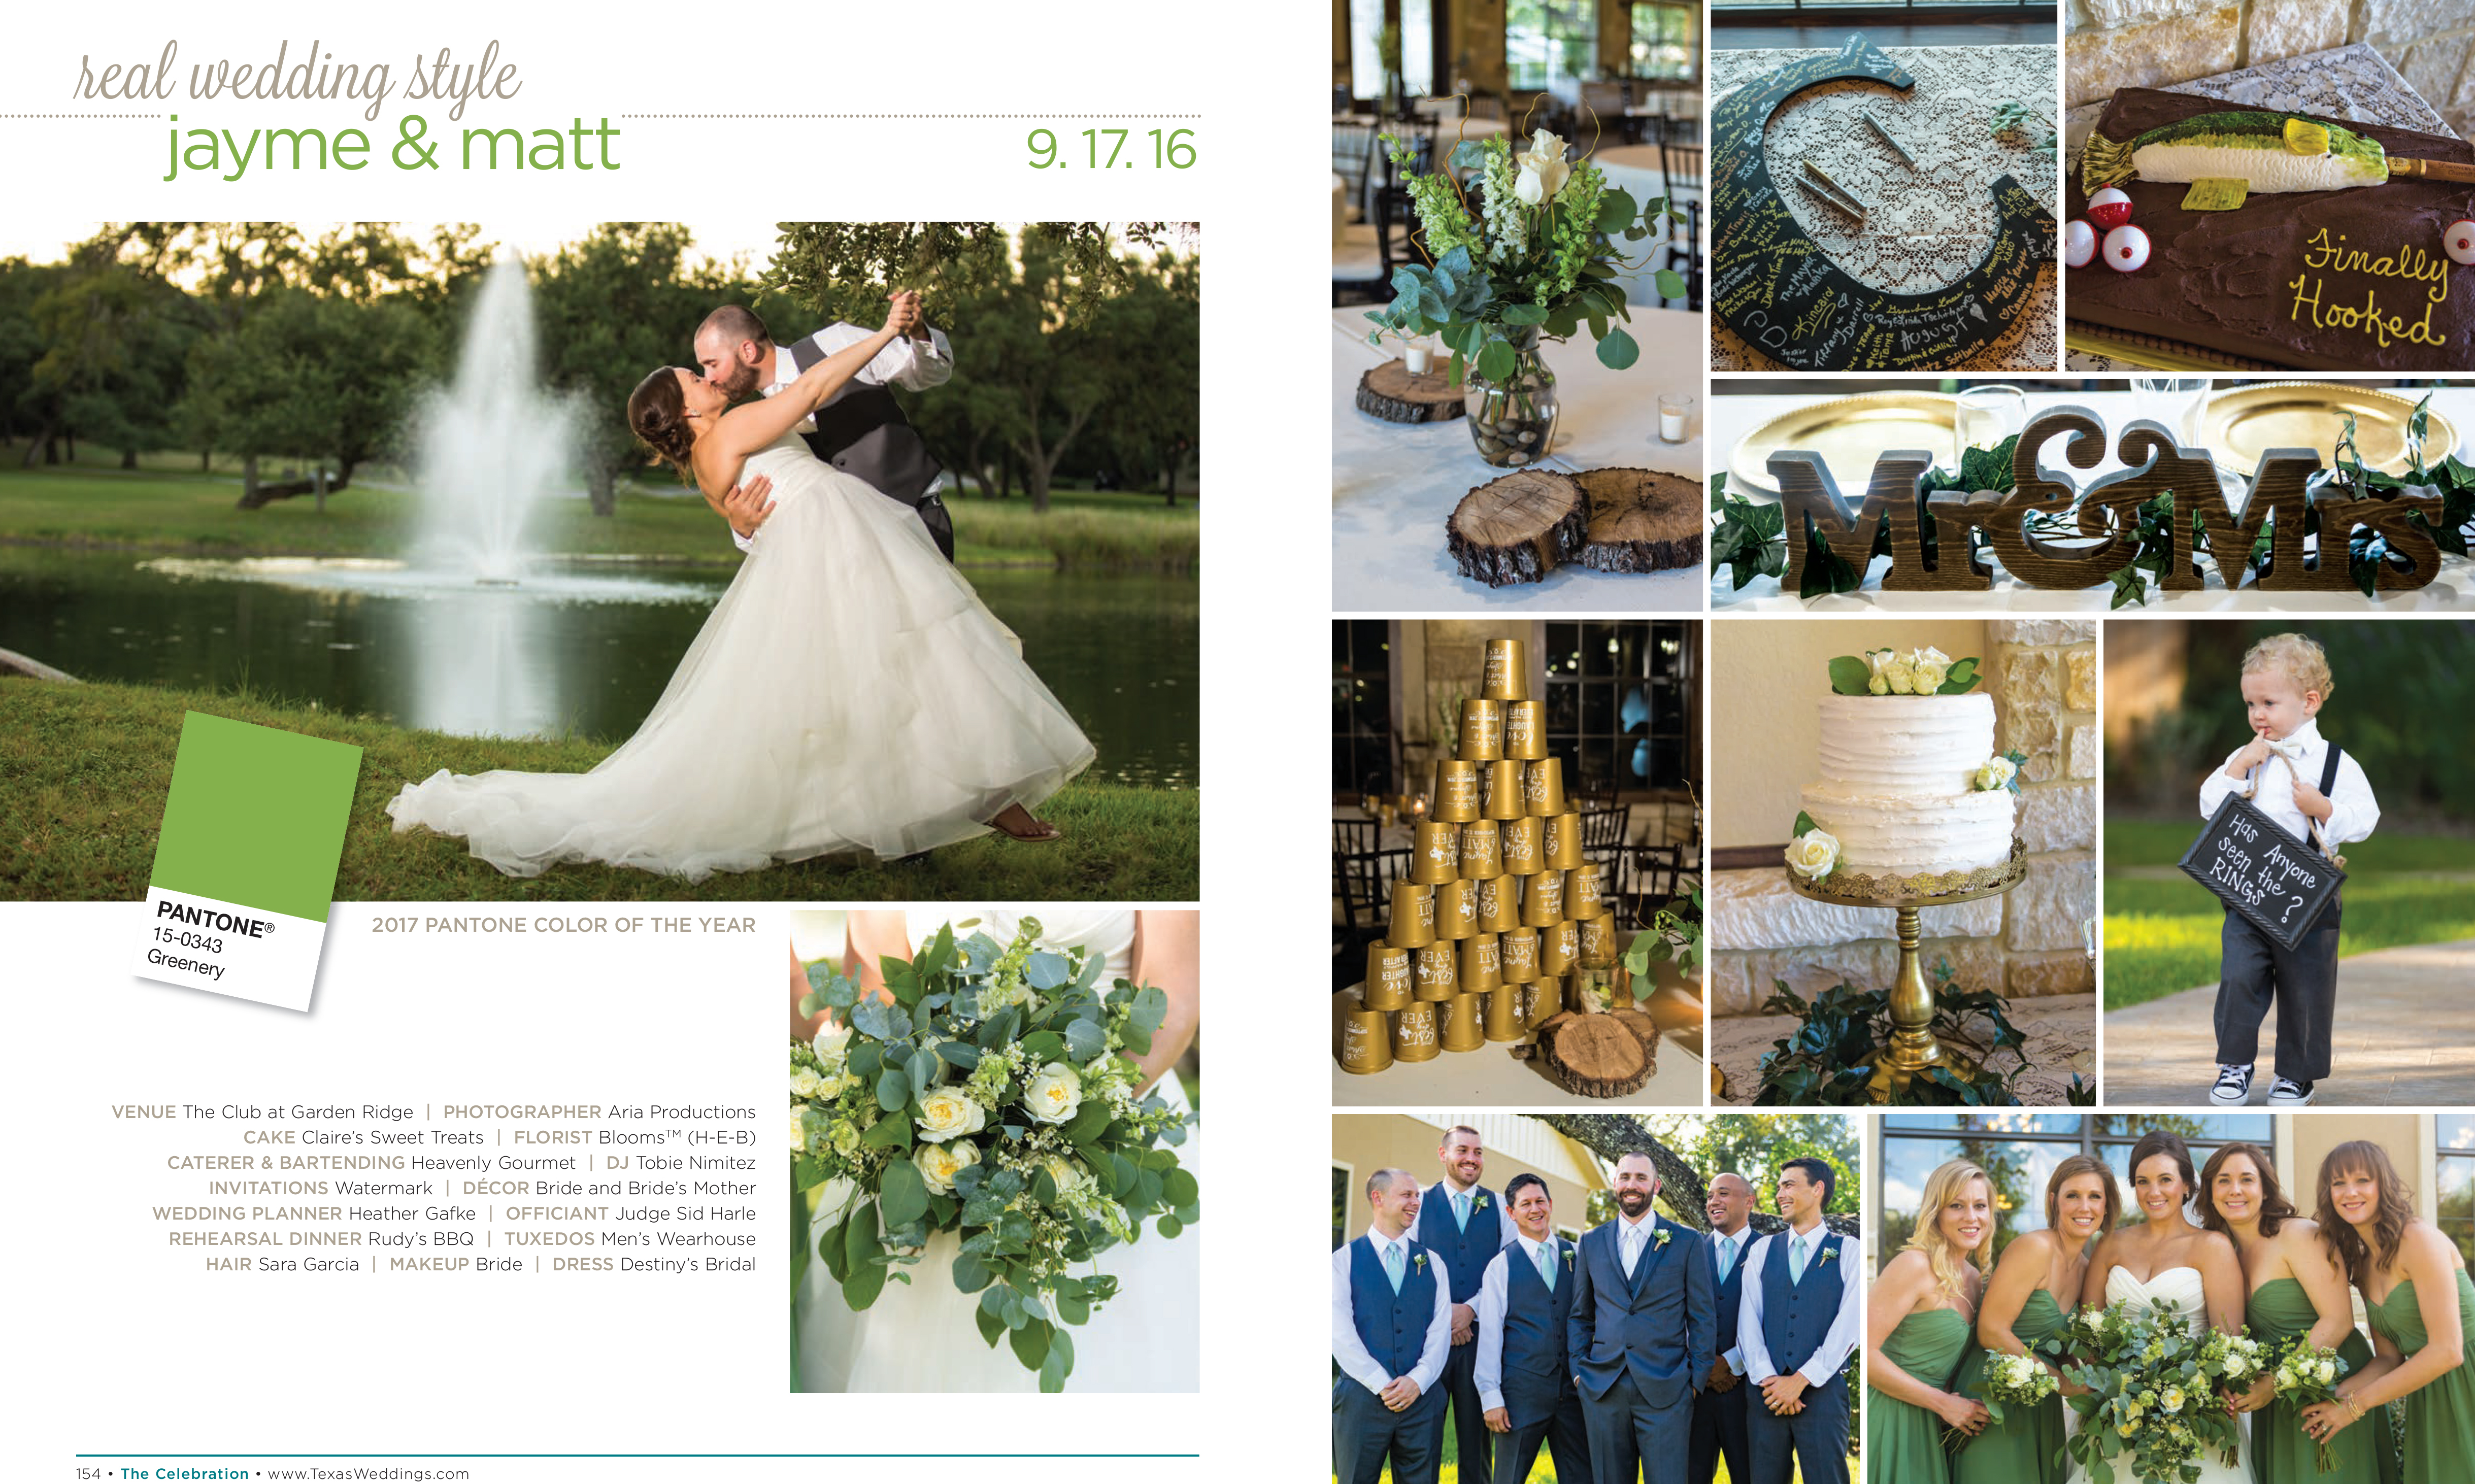 Jayme & Matt in their Real Wedding Page in the Spring/Summer 2017 Texas Wedding Guide